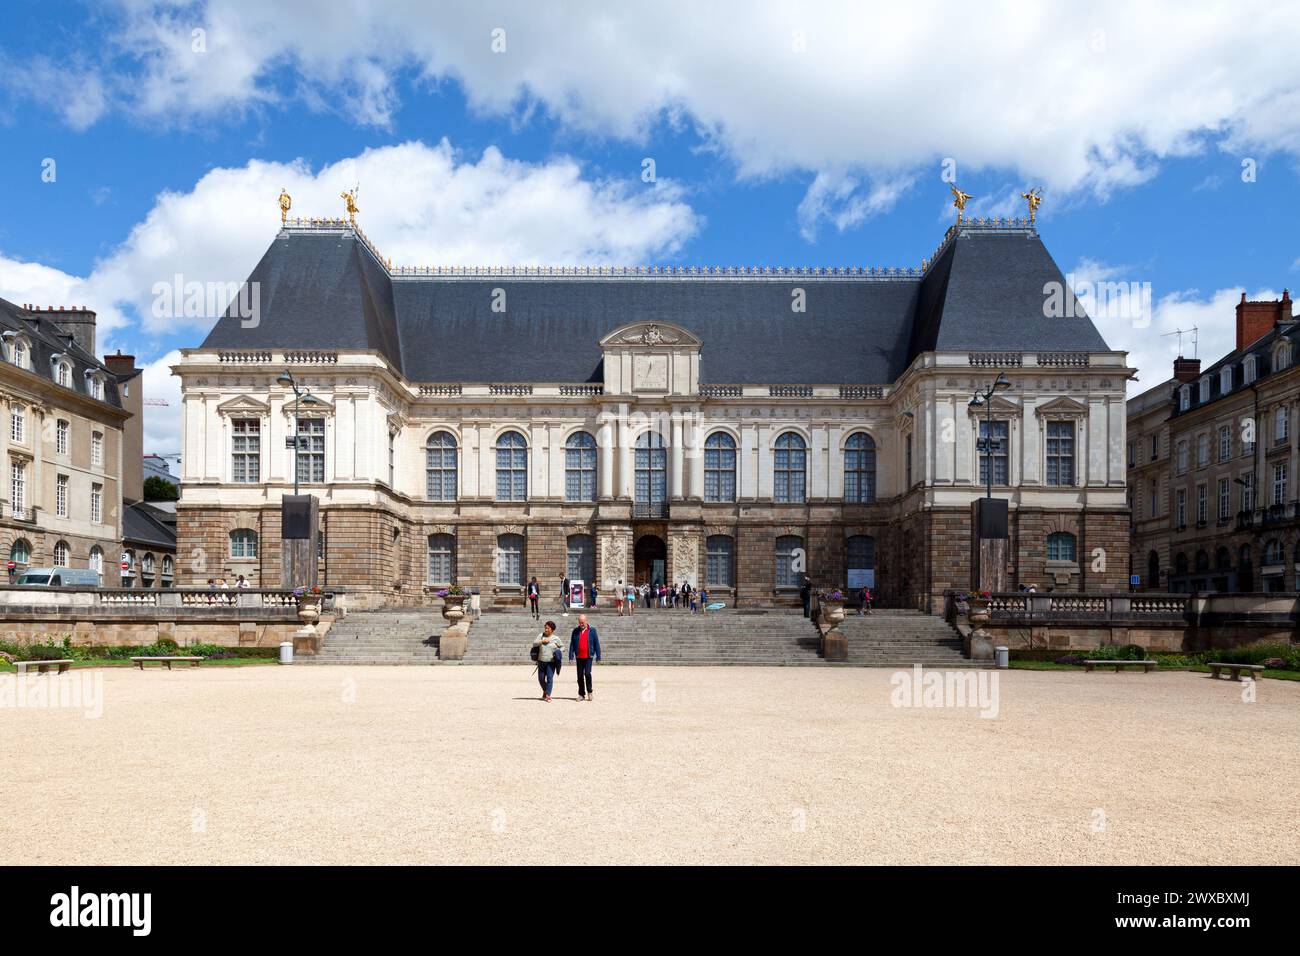 Rennes, France - July 30 2017: The Parlement de Bretagne (Parliament of Brittany), is a building of classical architecture built in the seventeenth ce Stock Photo